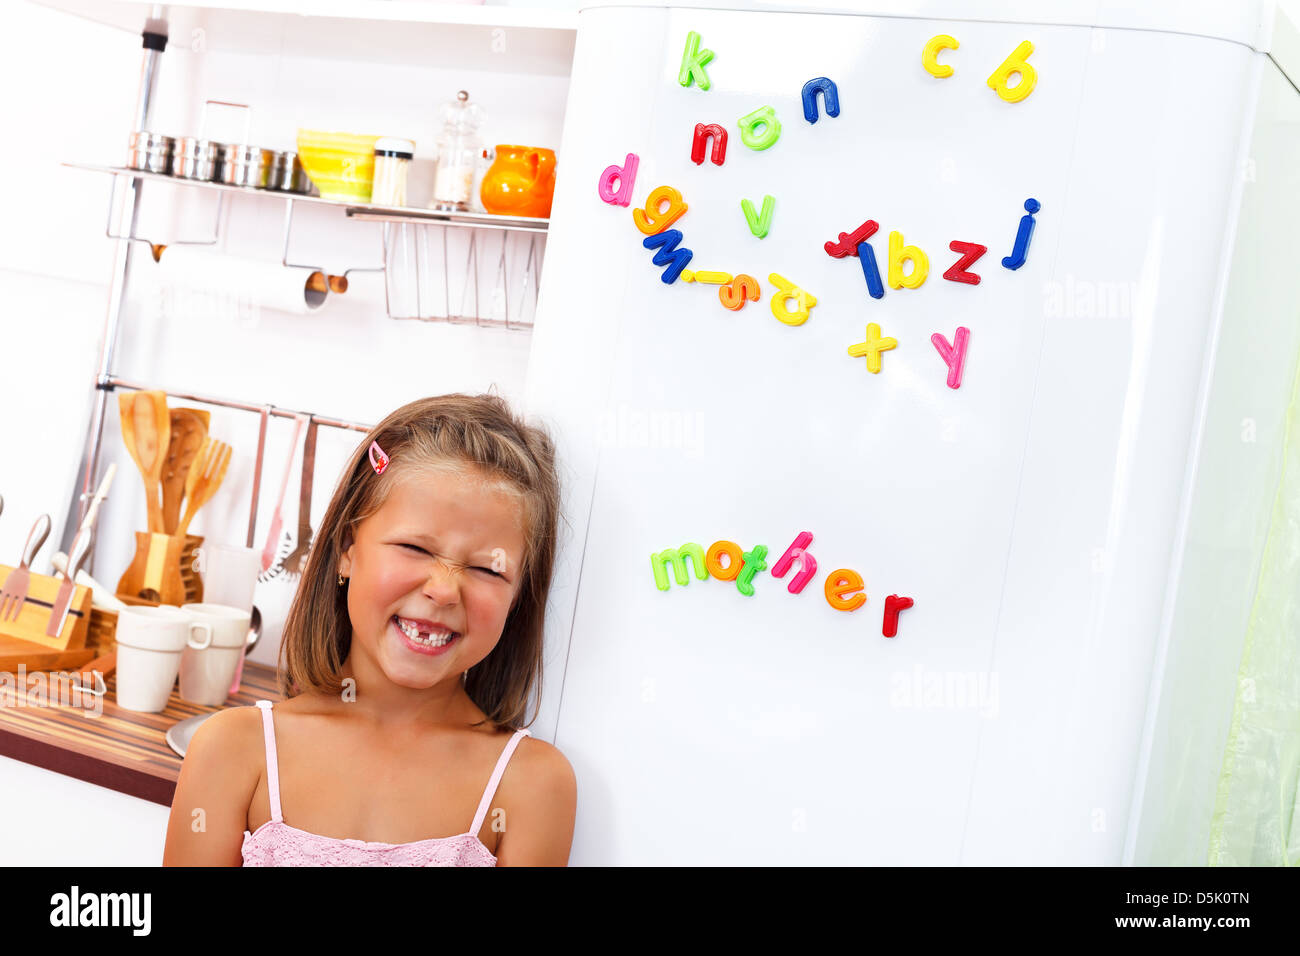 Little girl making funny face in front of the fridge with color letter magnets on it Stock Photo